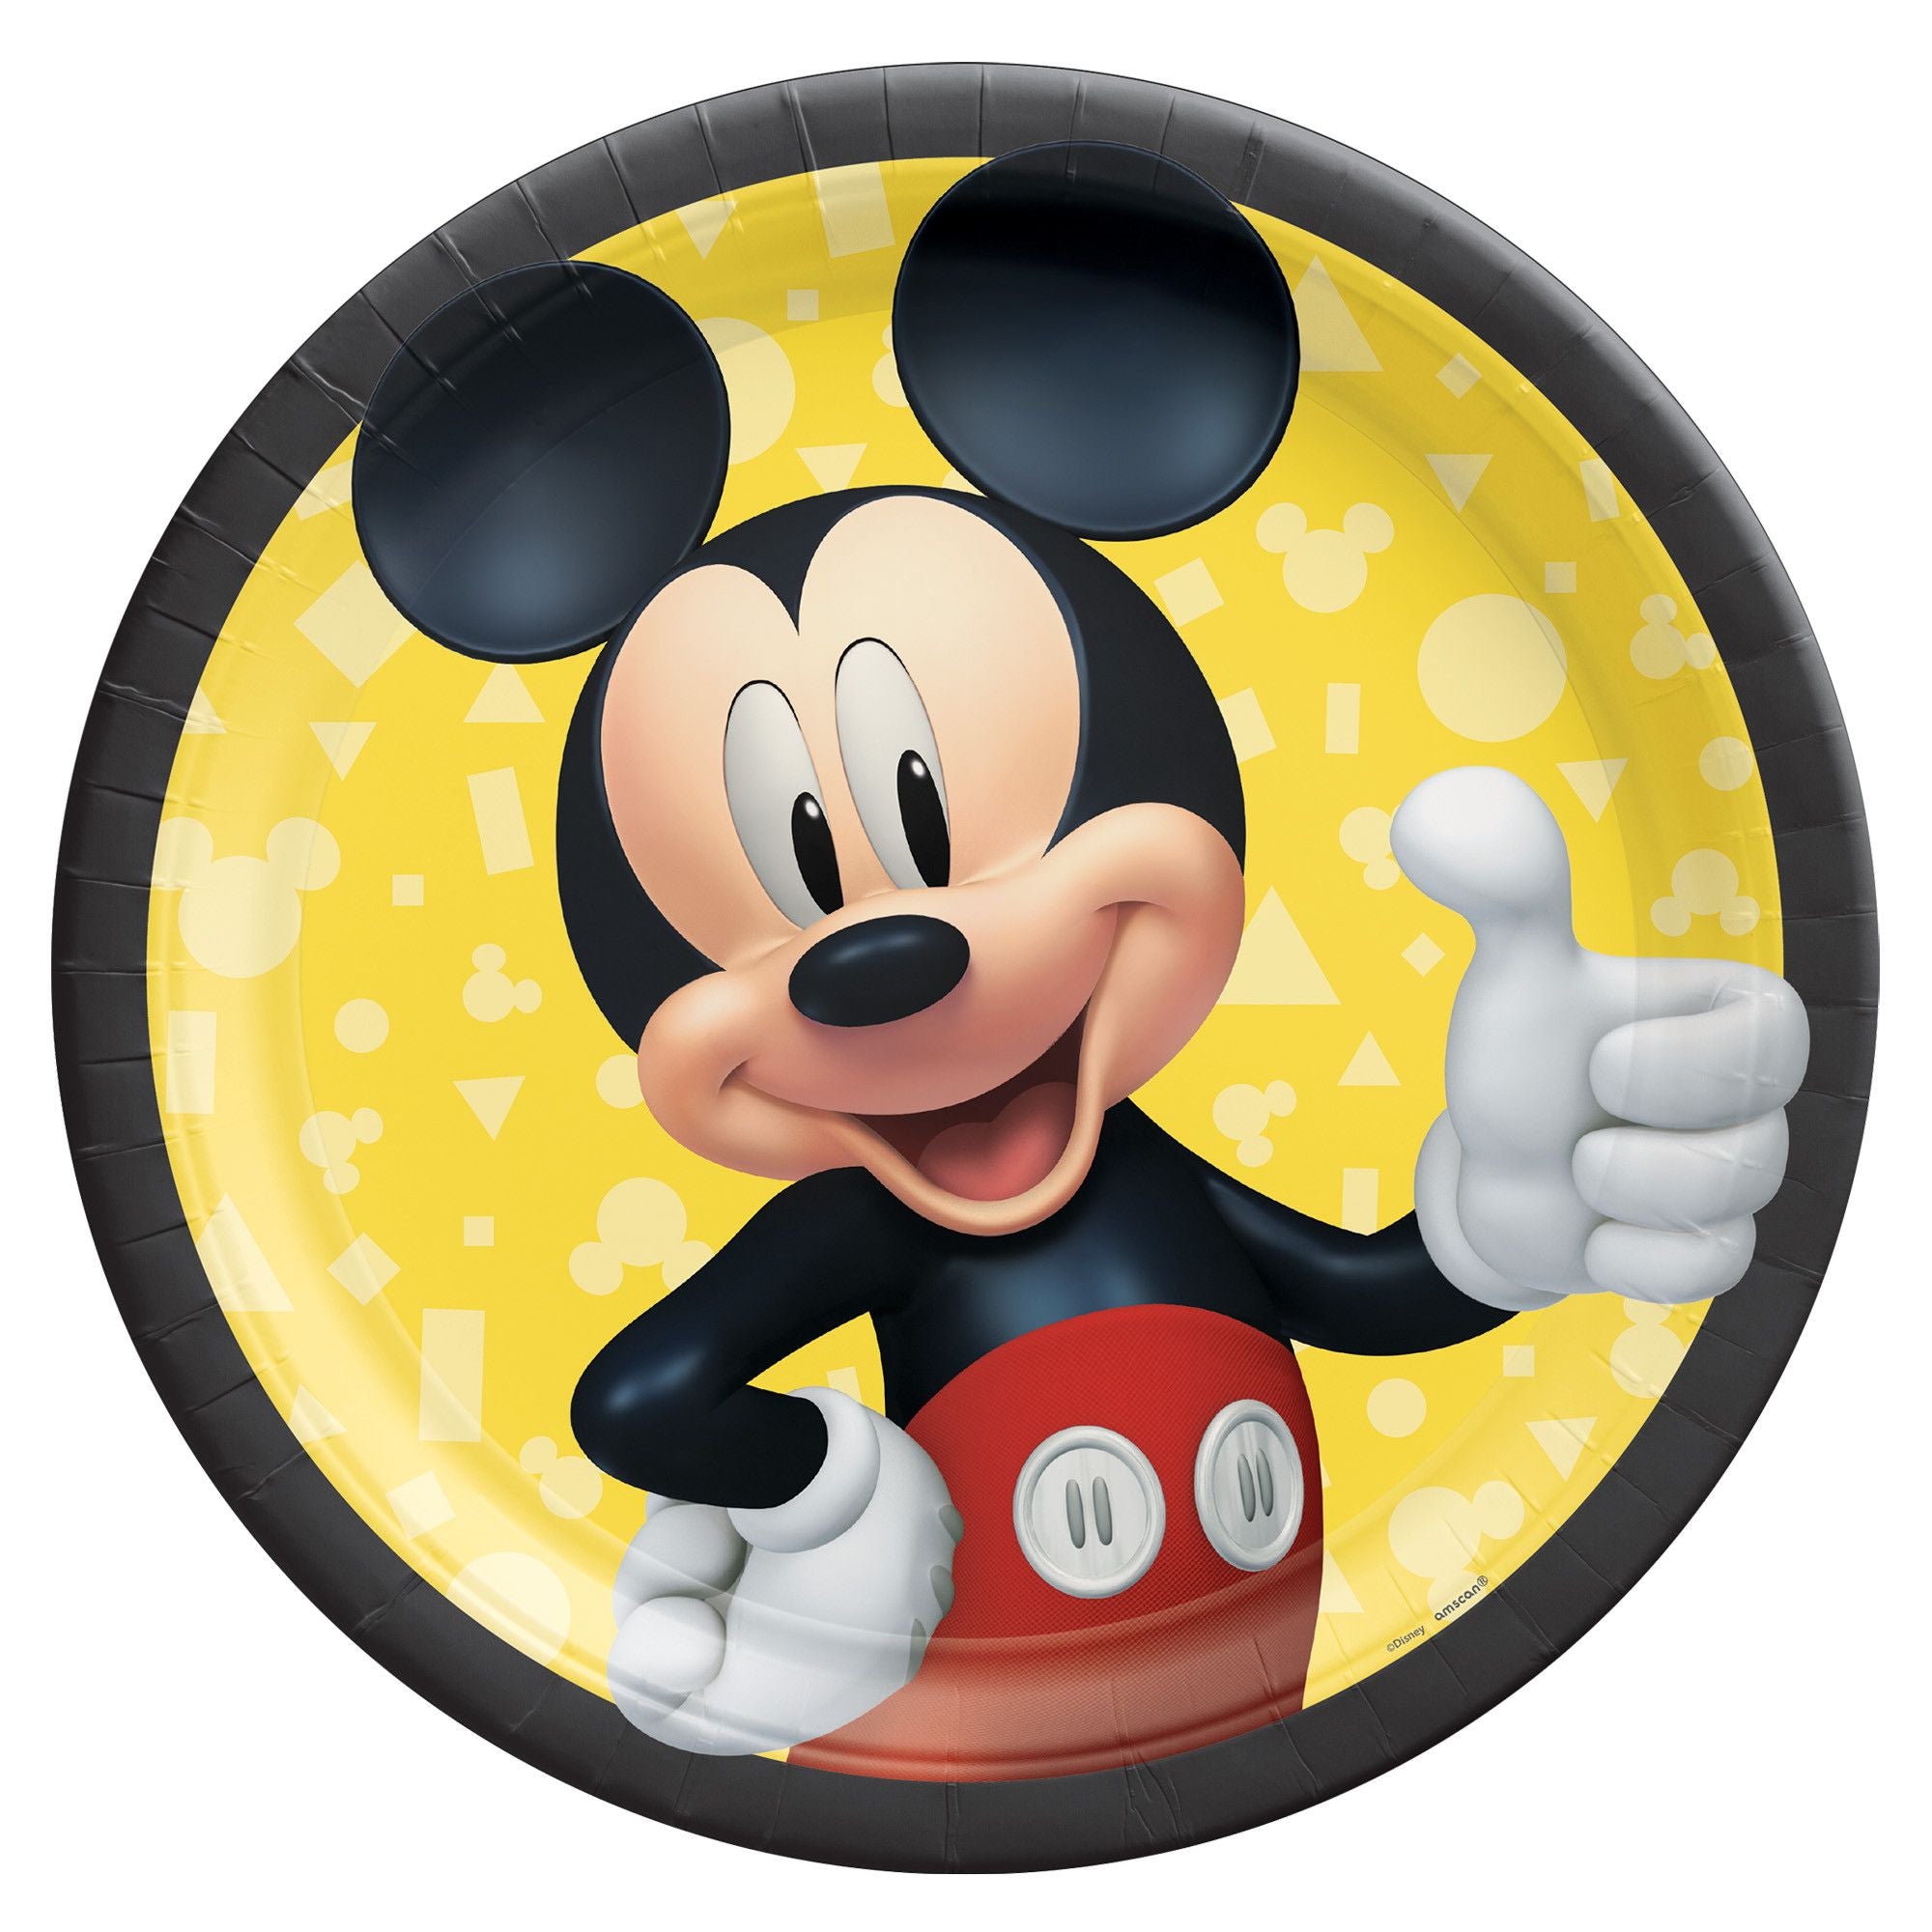 Mickey Mouse Forever 9" Round Plates 8CT